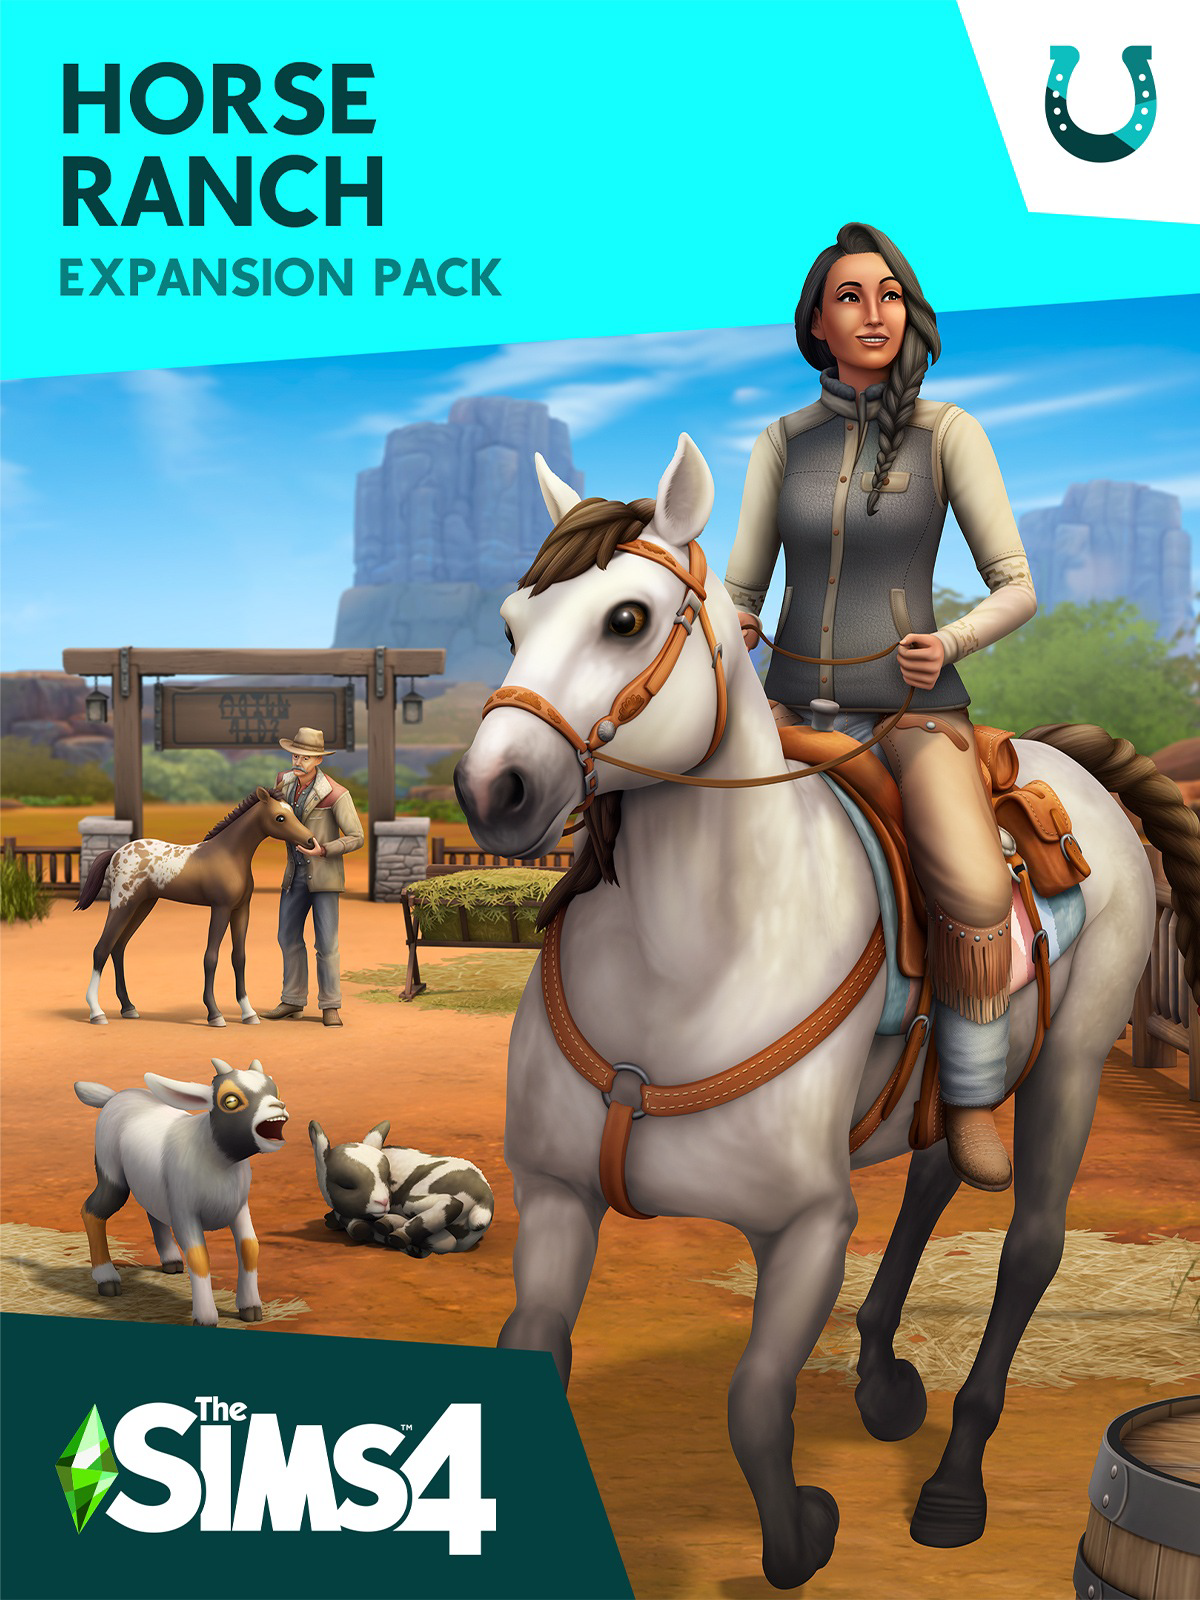 The Sims 4: Horse Ranch, The Sims Wiki